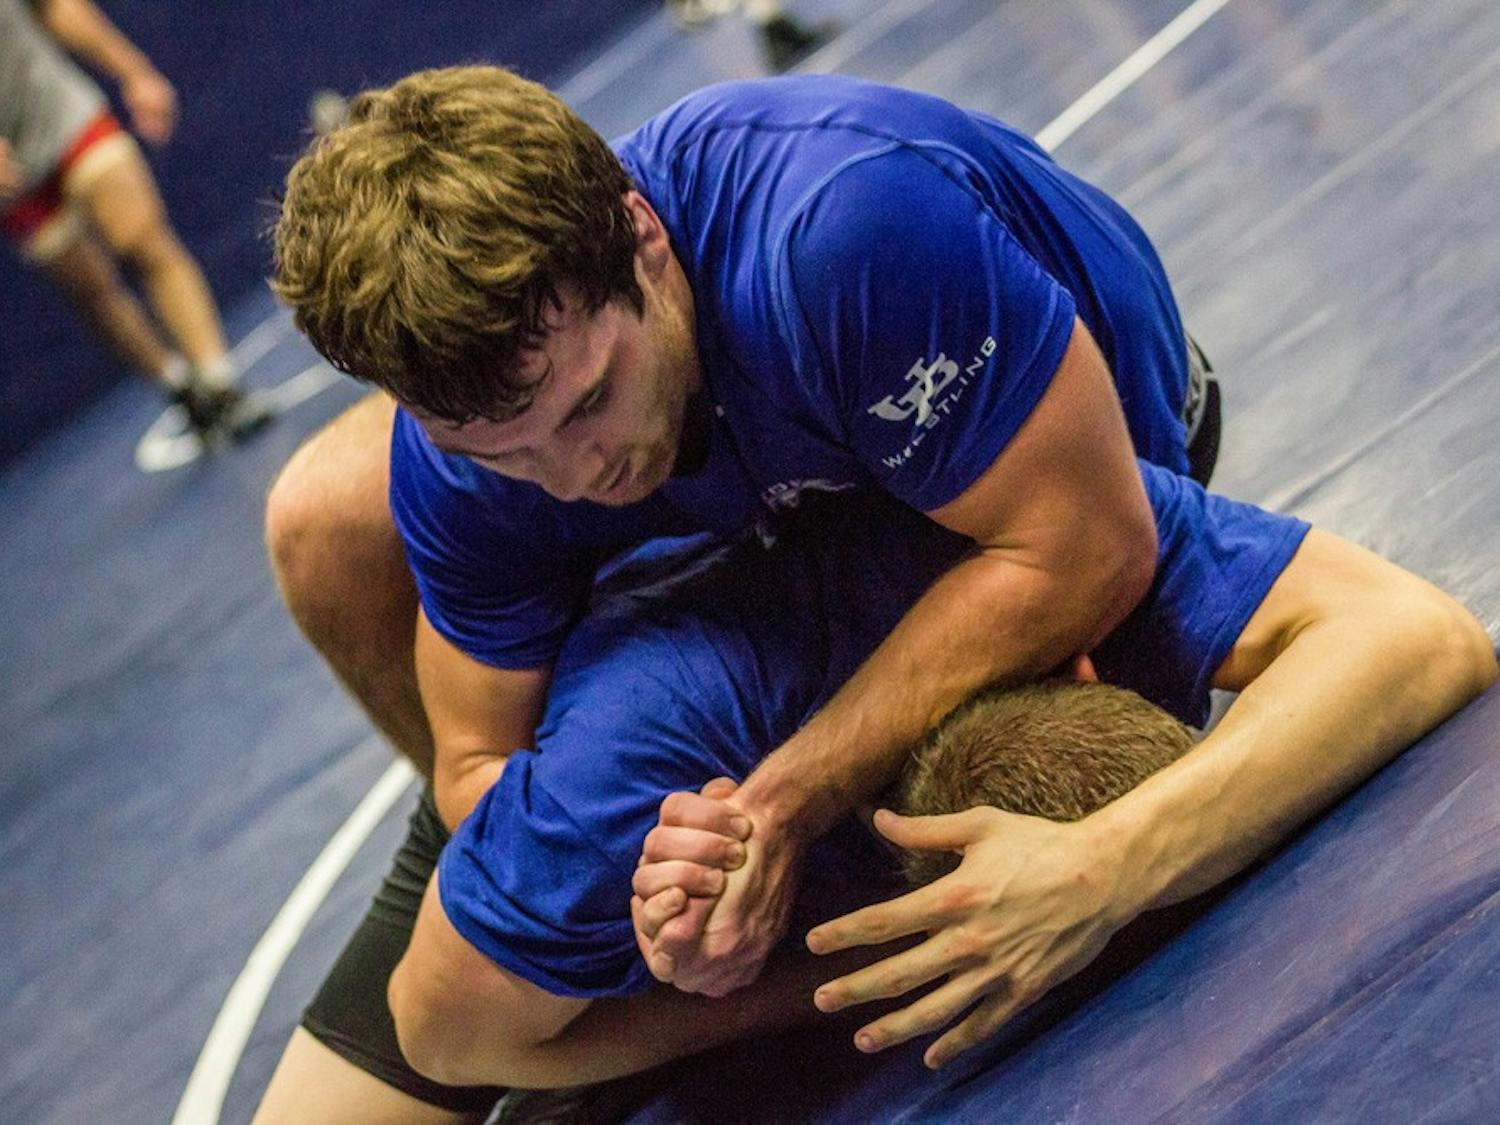 The wrestling team works on grappling at a practice last week. Members of the team have tried crash dieting to cut weight before, but there are much healthier ways to drop the pounds.